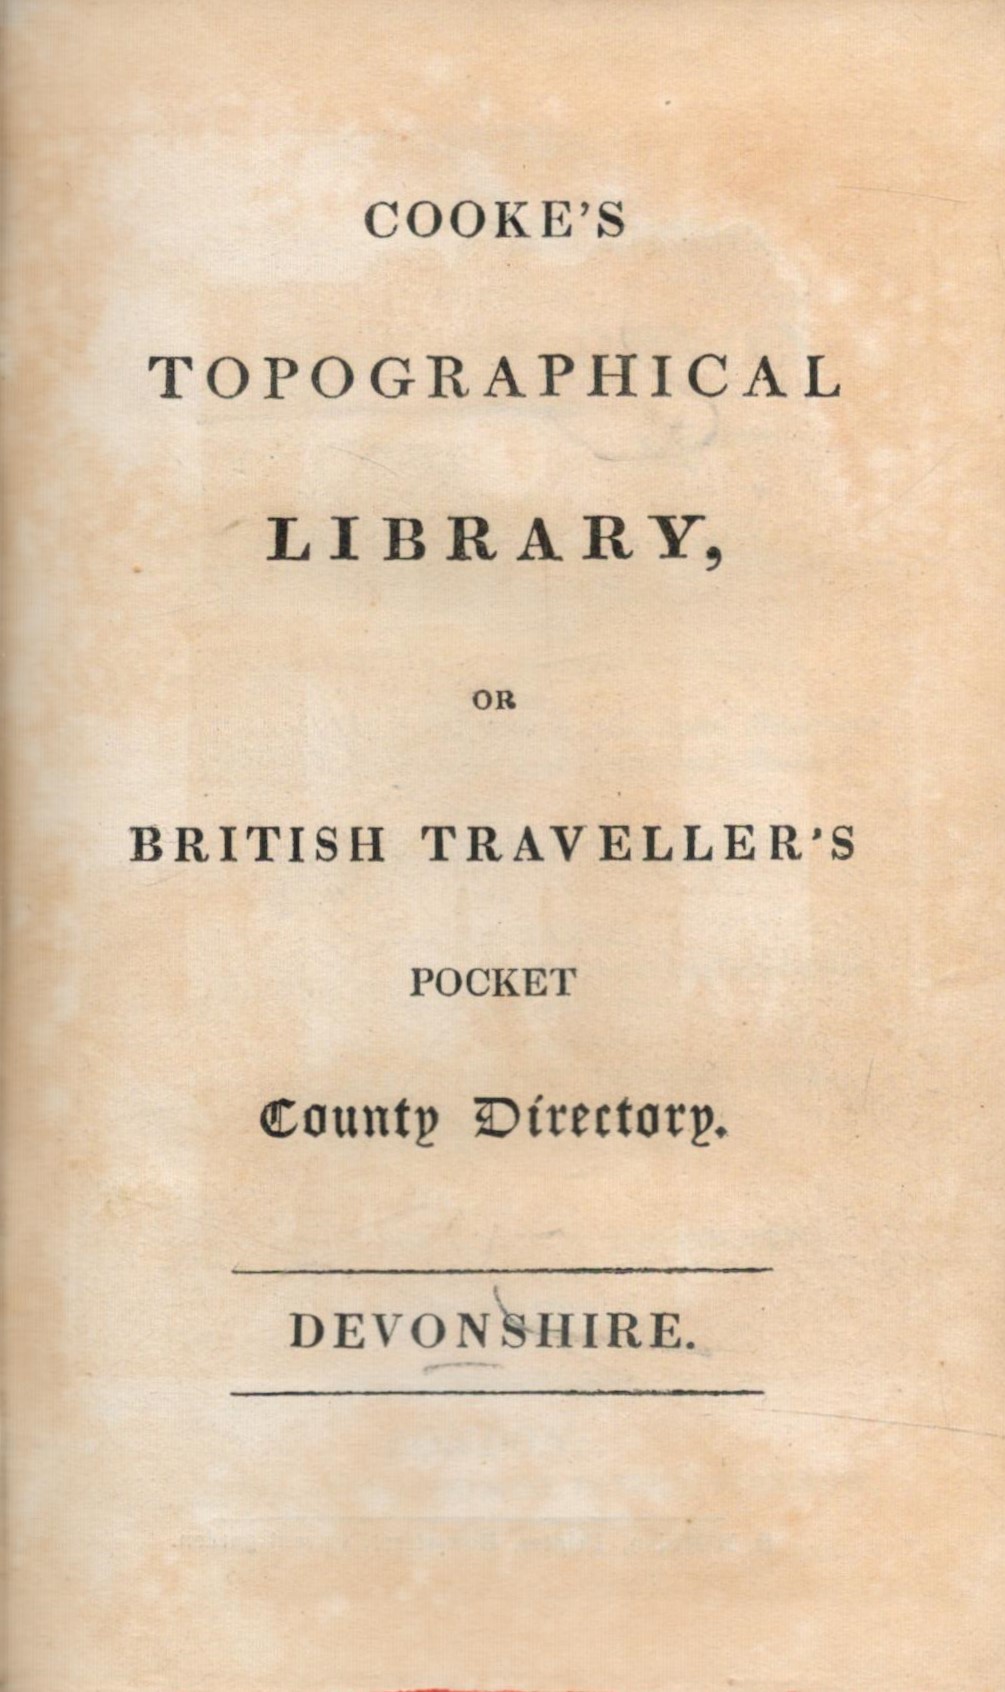 Cookes Topographical Library - Or British Traveller's Pocket Dictionary. Devonshire. New edition. - Image 2 of 3